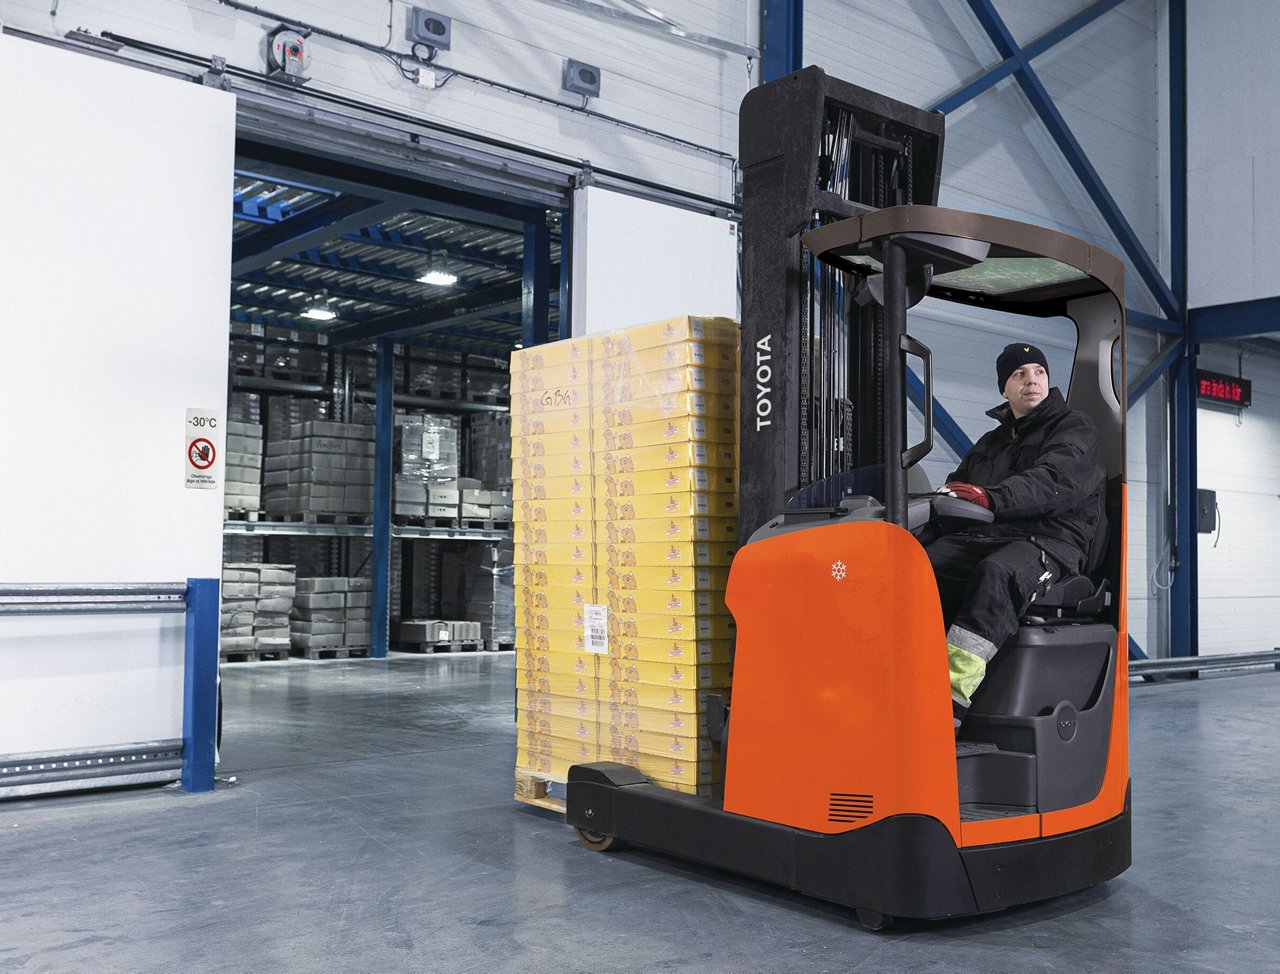 toyota moving mast reach truck being used in a freezer setting